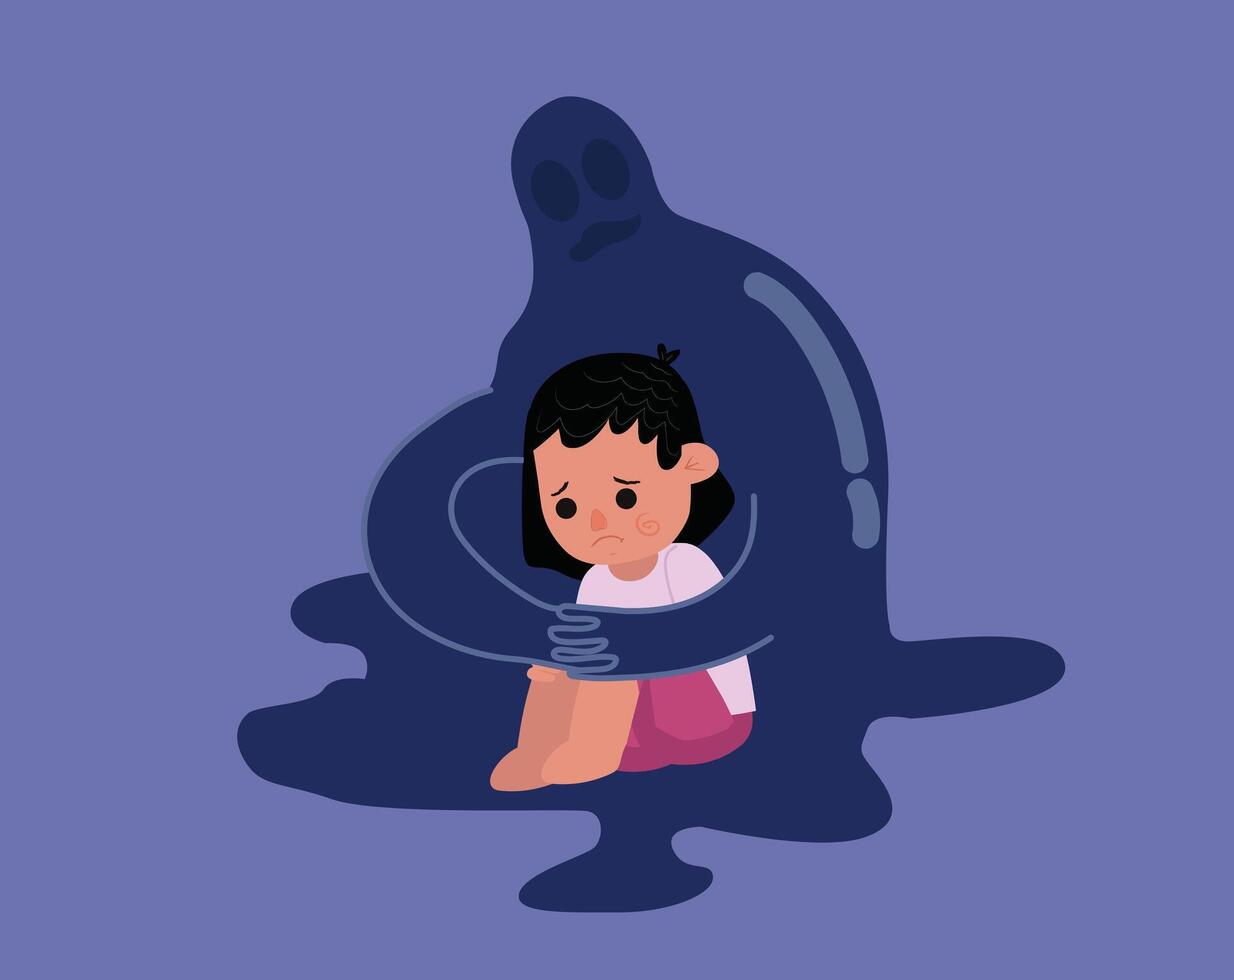 little girl tripped in depression, the kid sitting in the flour sad, Insecurity, and bullying children. Sad boy. Flat design. Bullying and harassment of children. Abstract flat illustration. Vector